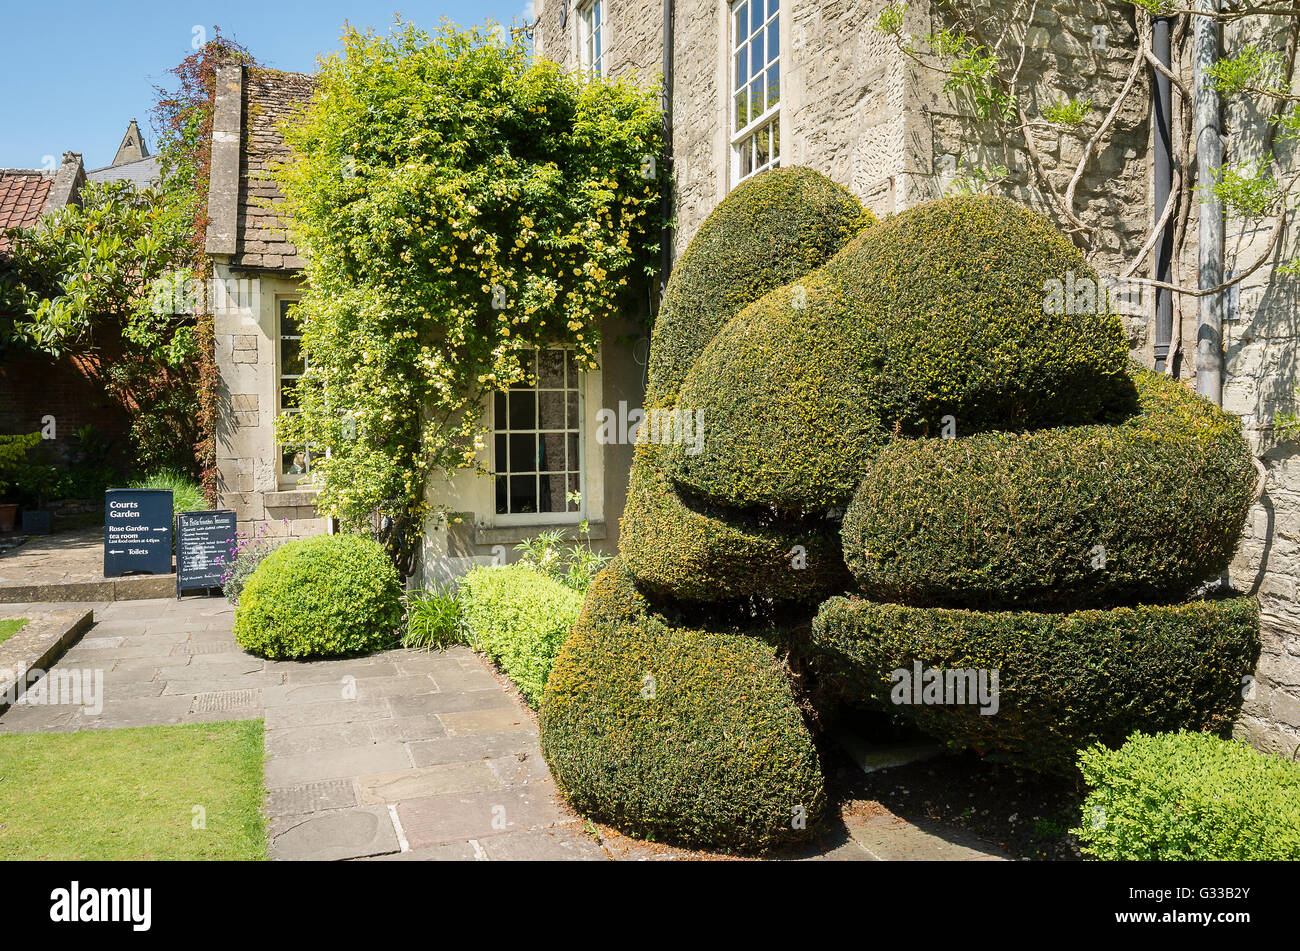 Ornate topiary at the Courts garden Stock Photo